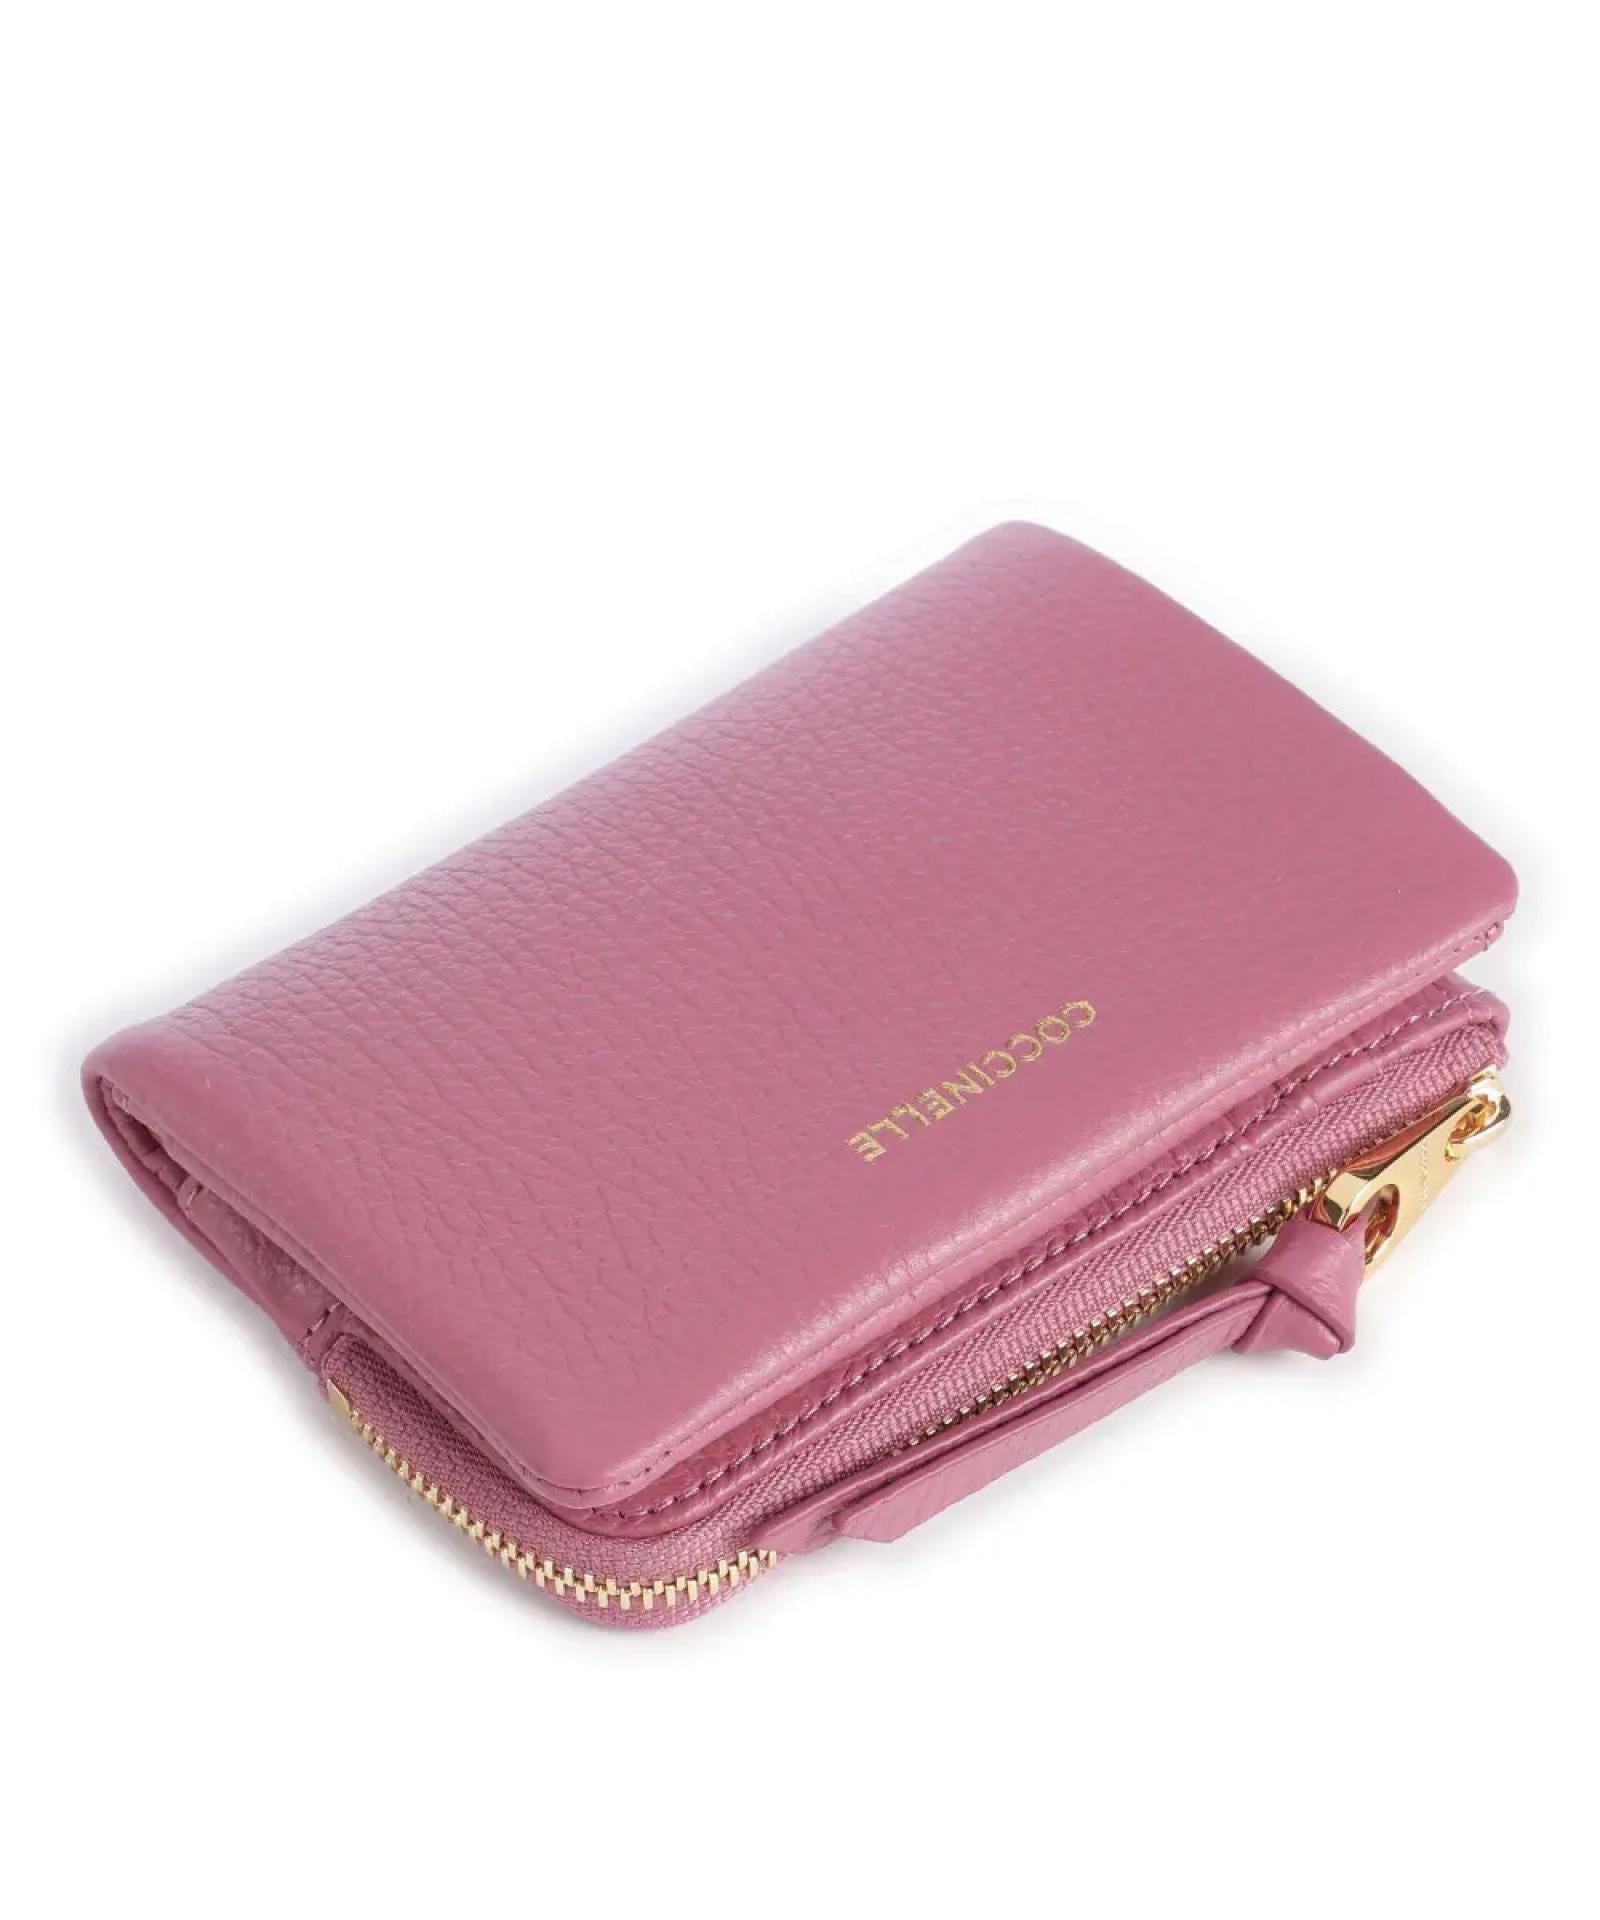 Coccinelle WALLET GRAINED LEATHER / PULP PINK